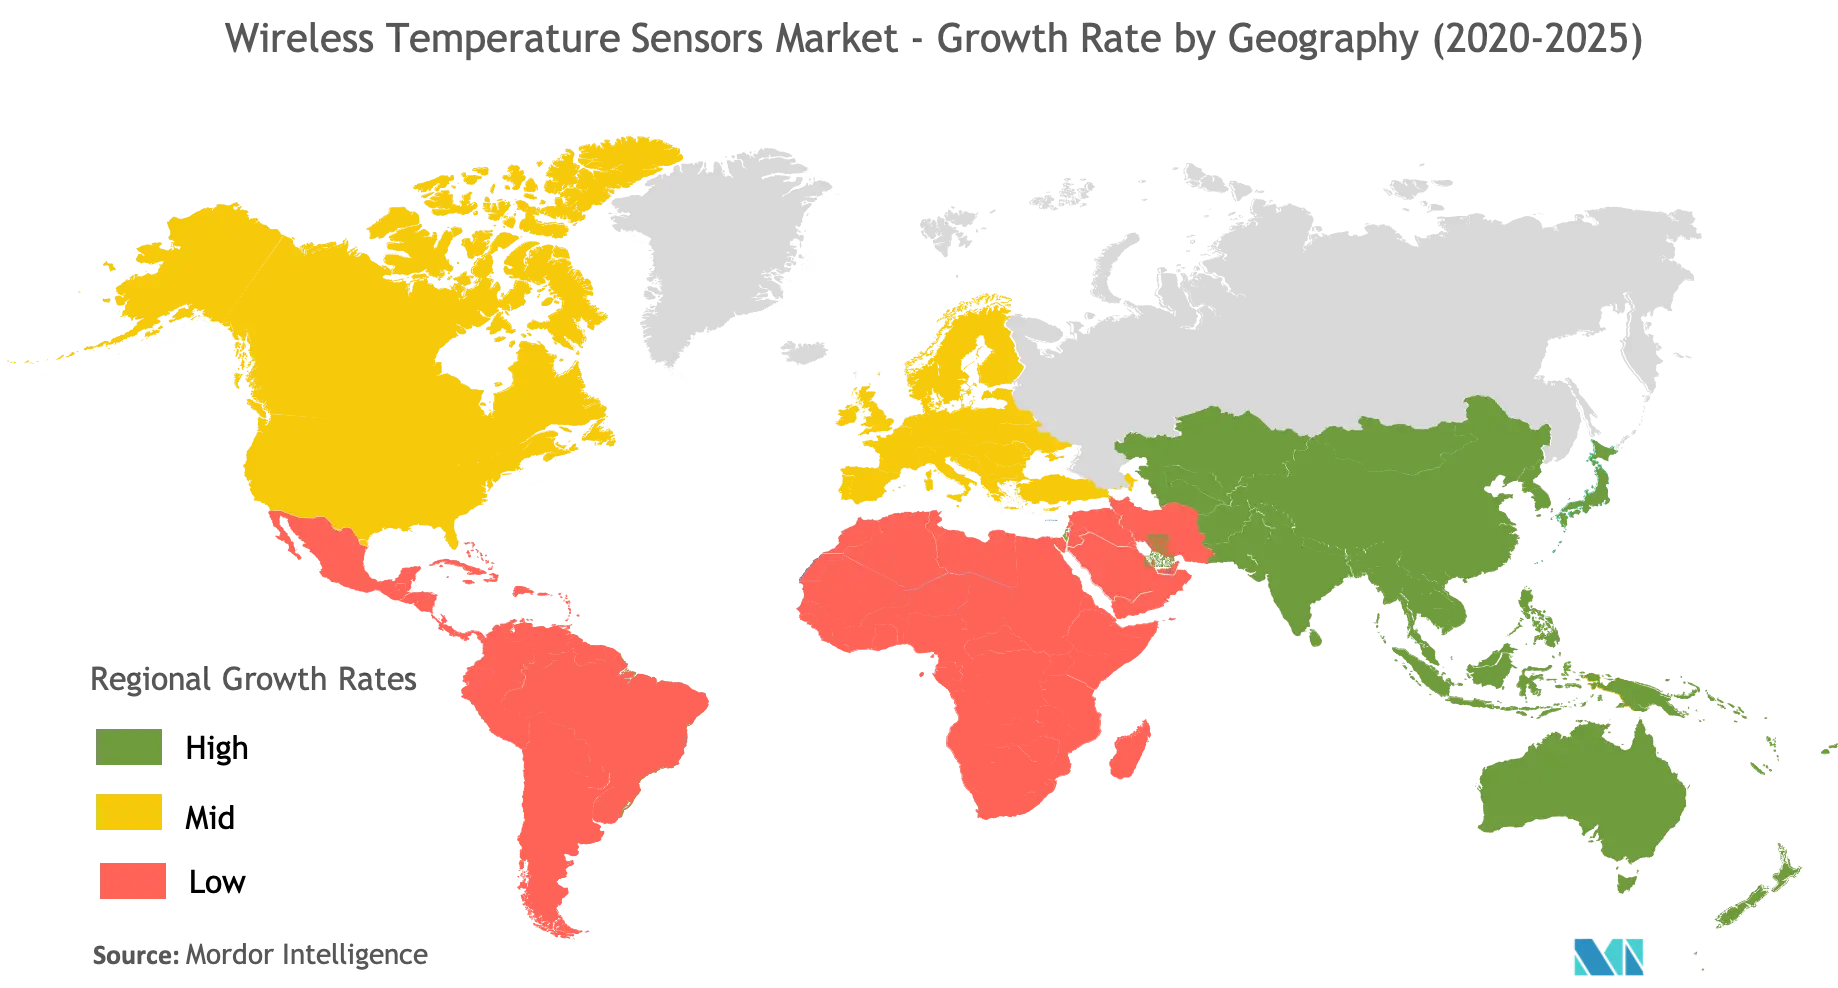 Wireless Temperature Sensors Market - Growth Rate by Geography (2020 - 2025)